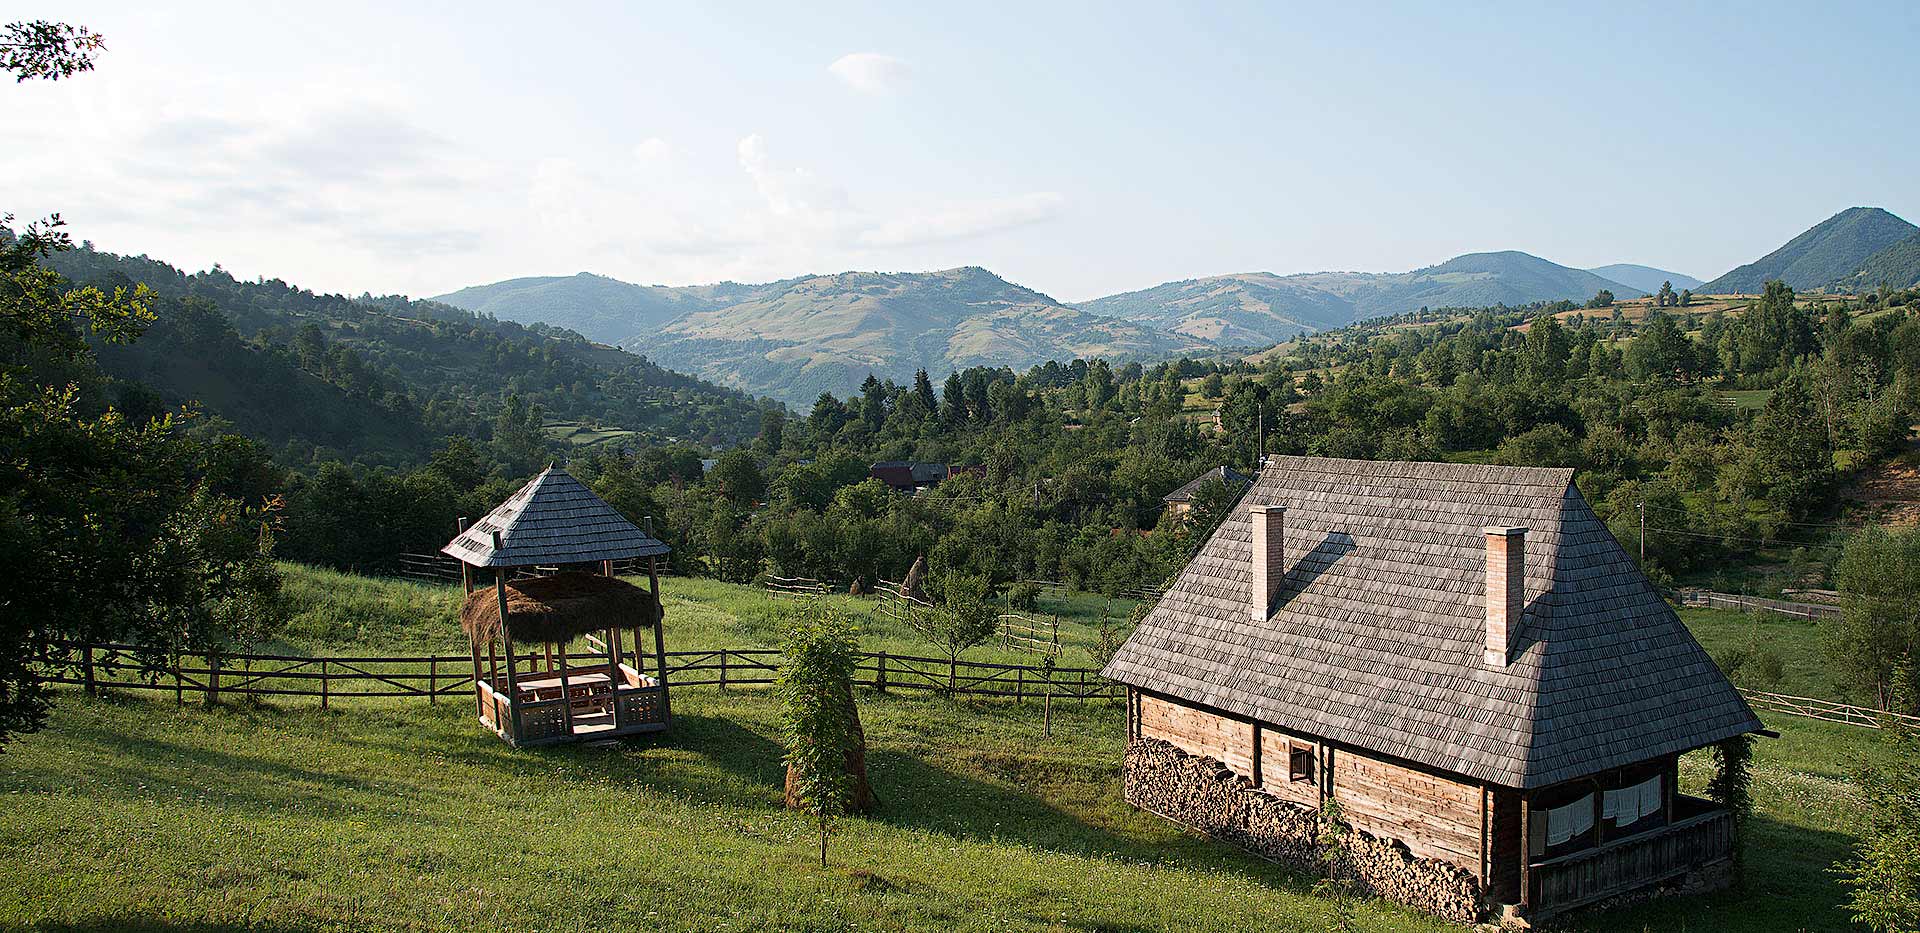 sketch Spider Excavation Cosma Lodge in Maramures, Romania | Cottages / Cabins / Chalets